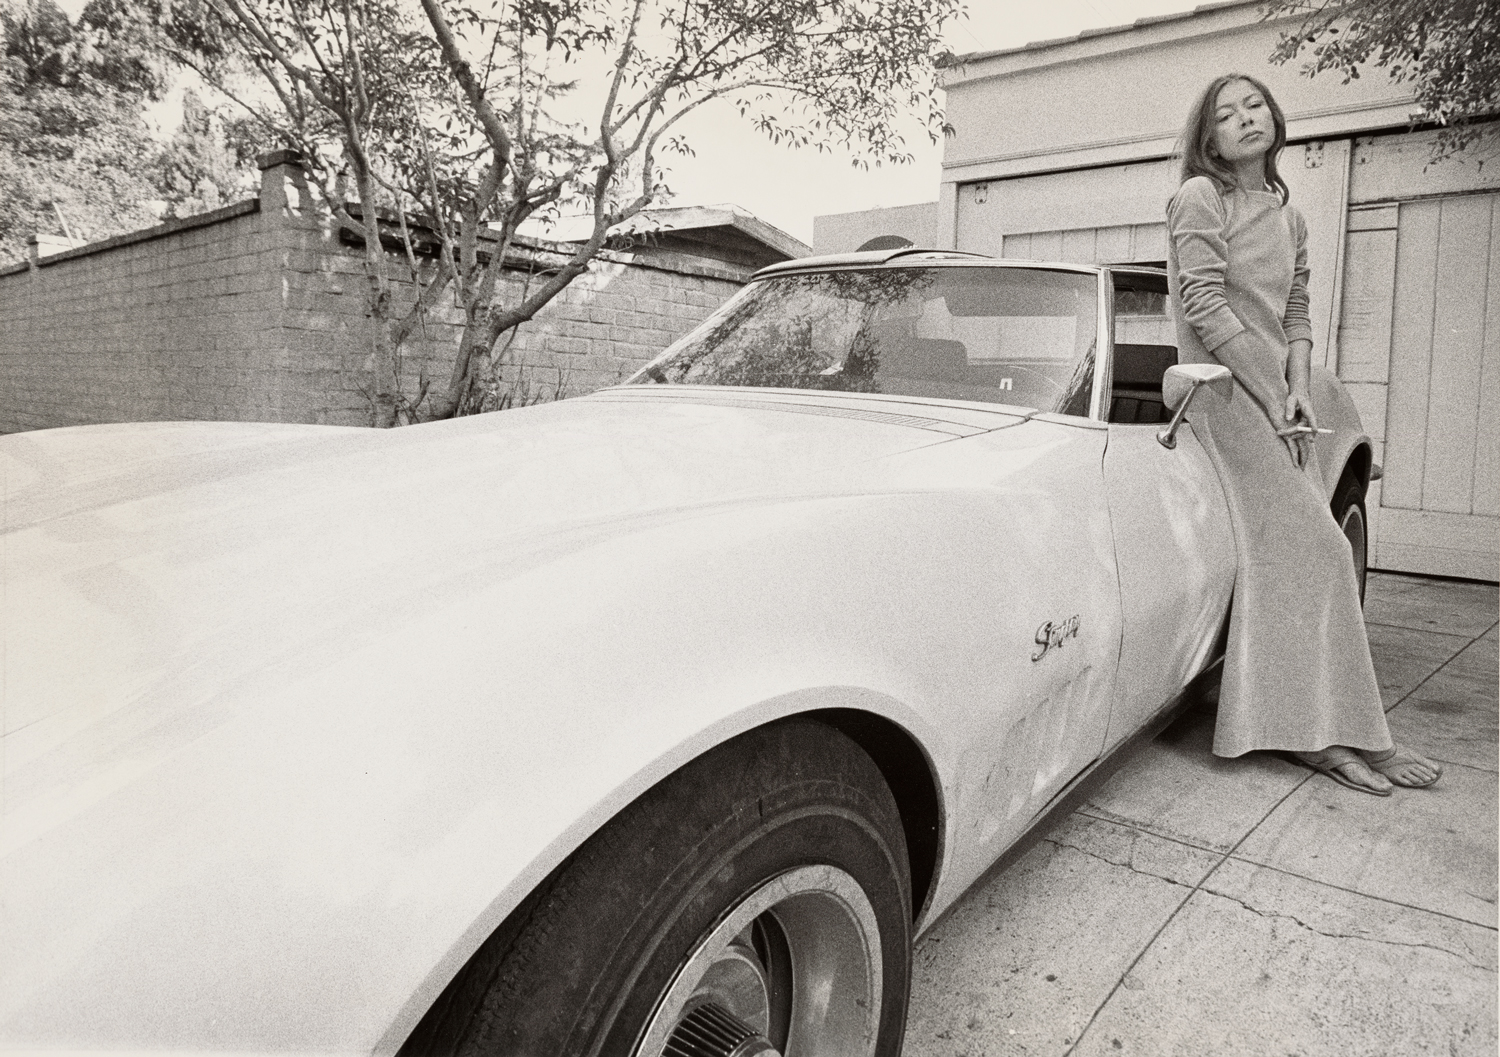 A black and white image of a woman leaning against a car